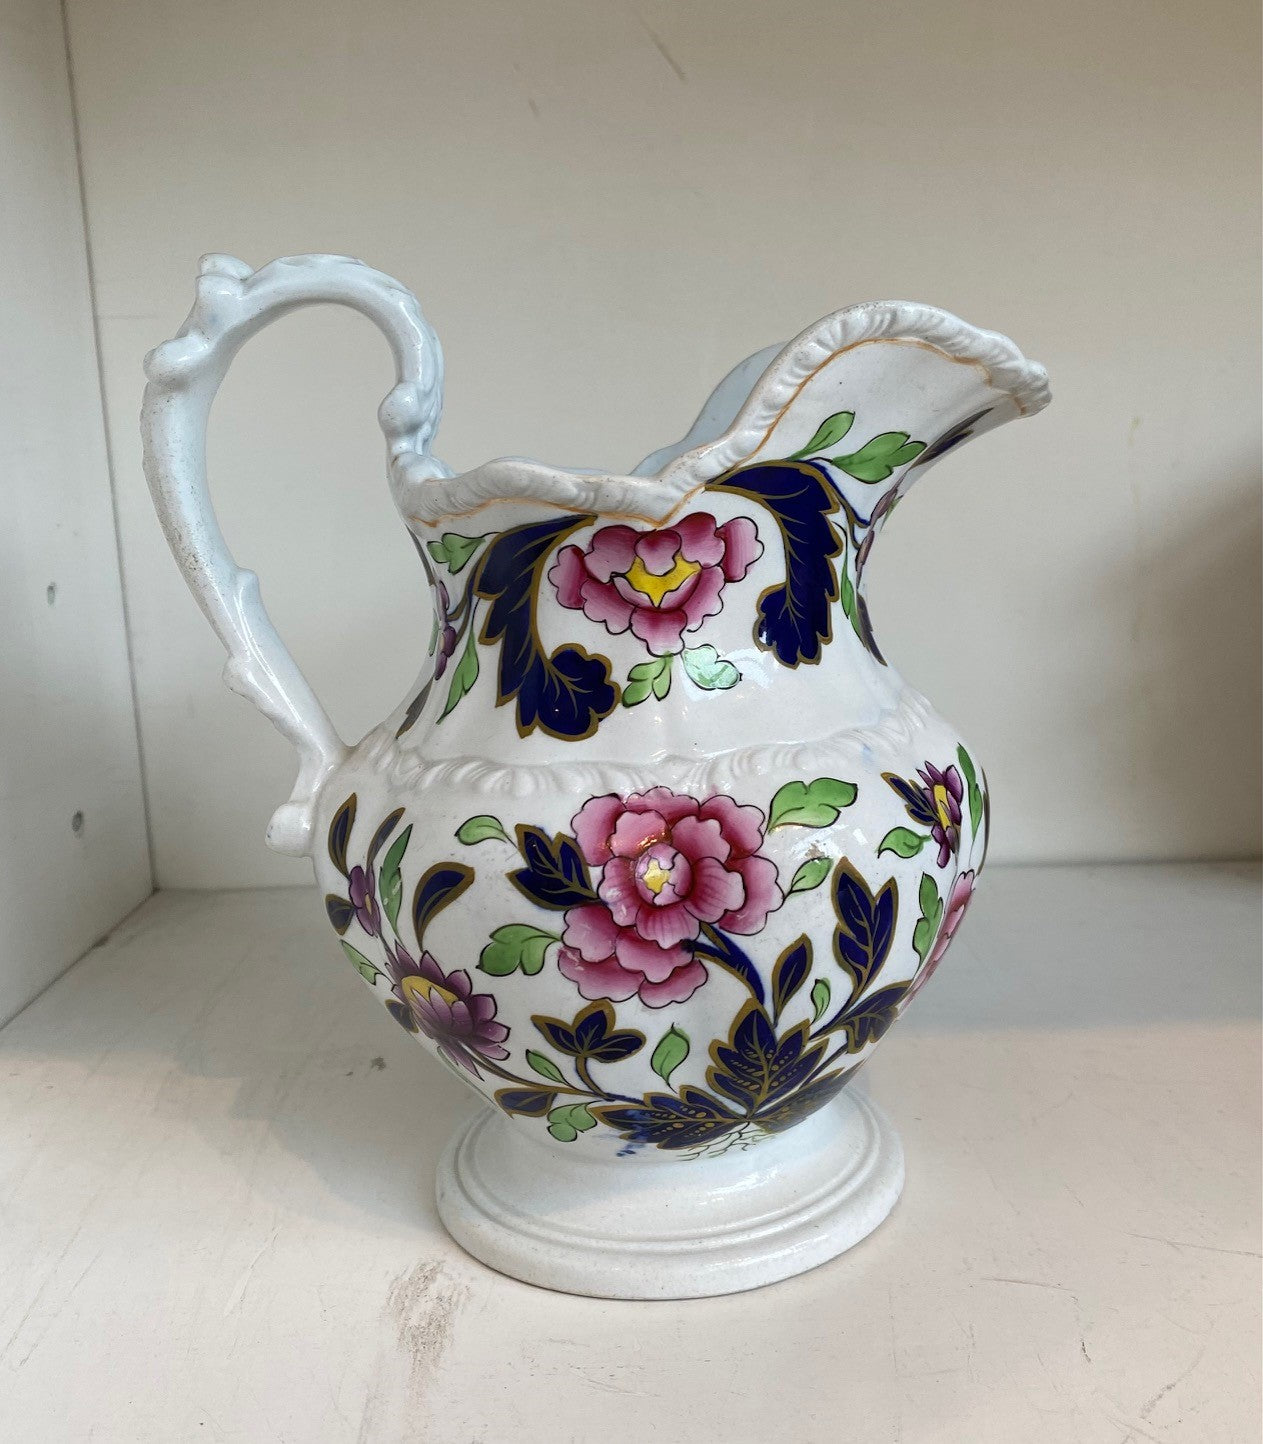 A Stoneware Pitcher Jug Handpainted with Flowers and Gilded Accents by John & William Ridgway